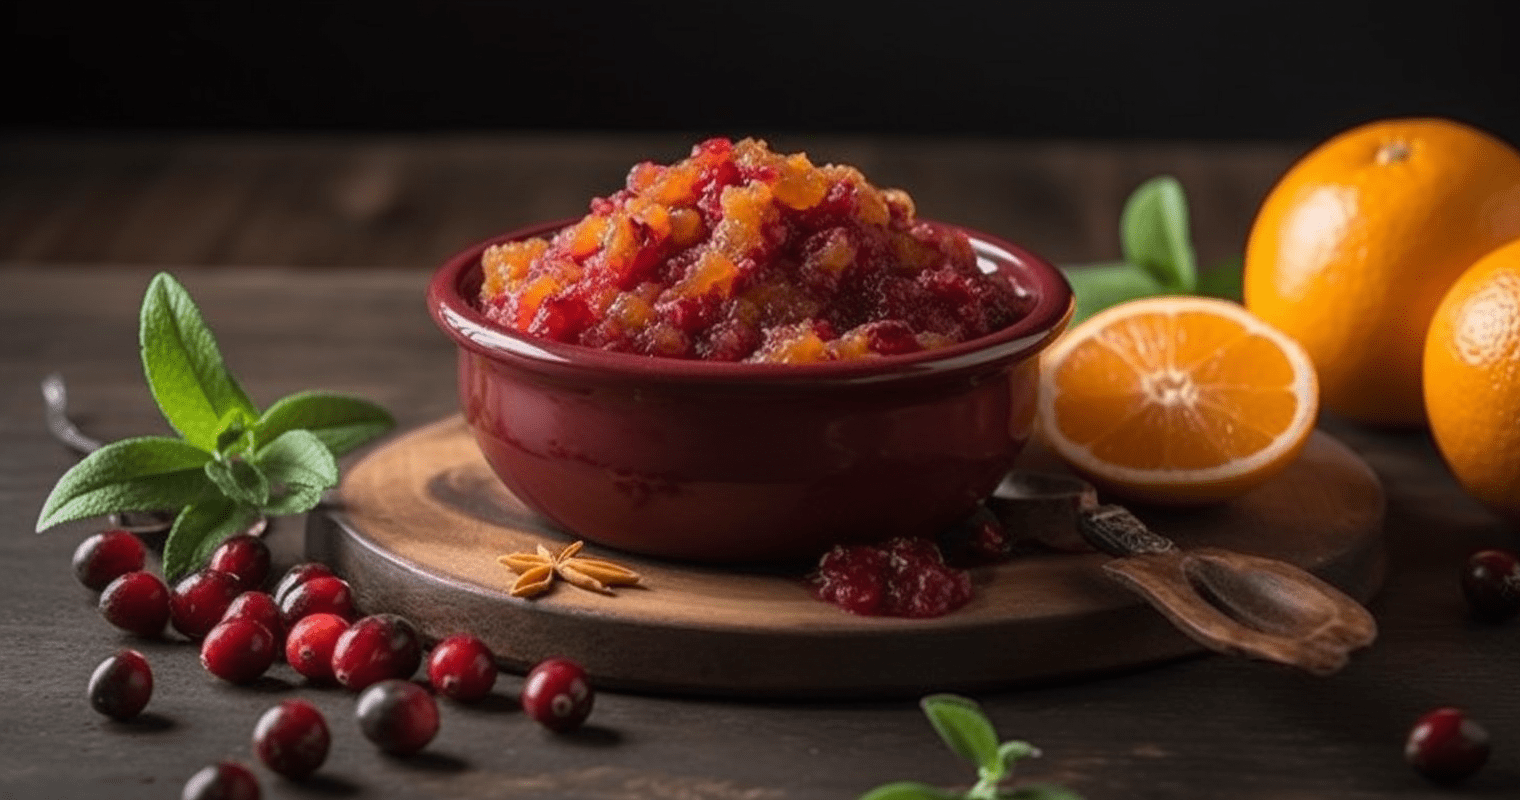 Delicious Cranberry Orange Relish: A Time-Honored Holiday Recipe